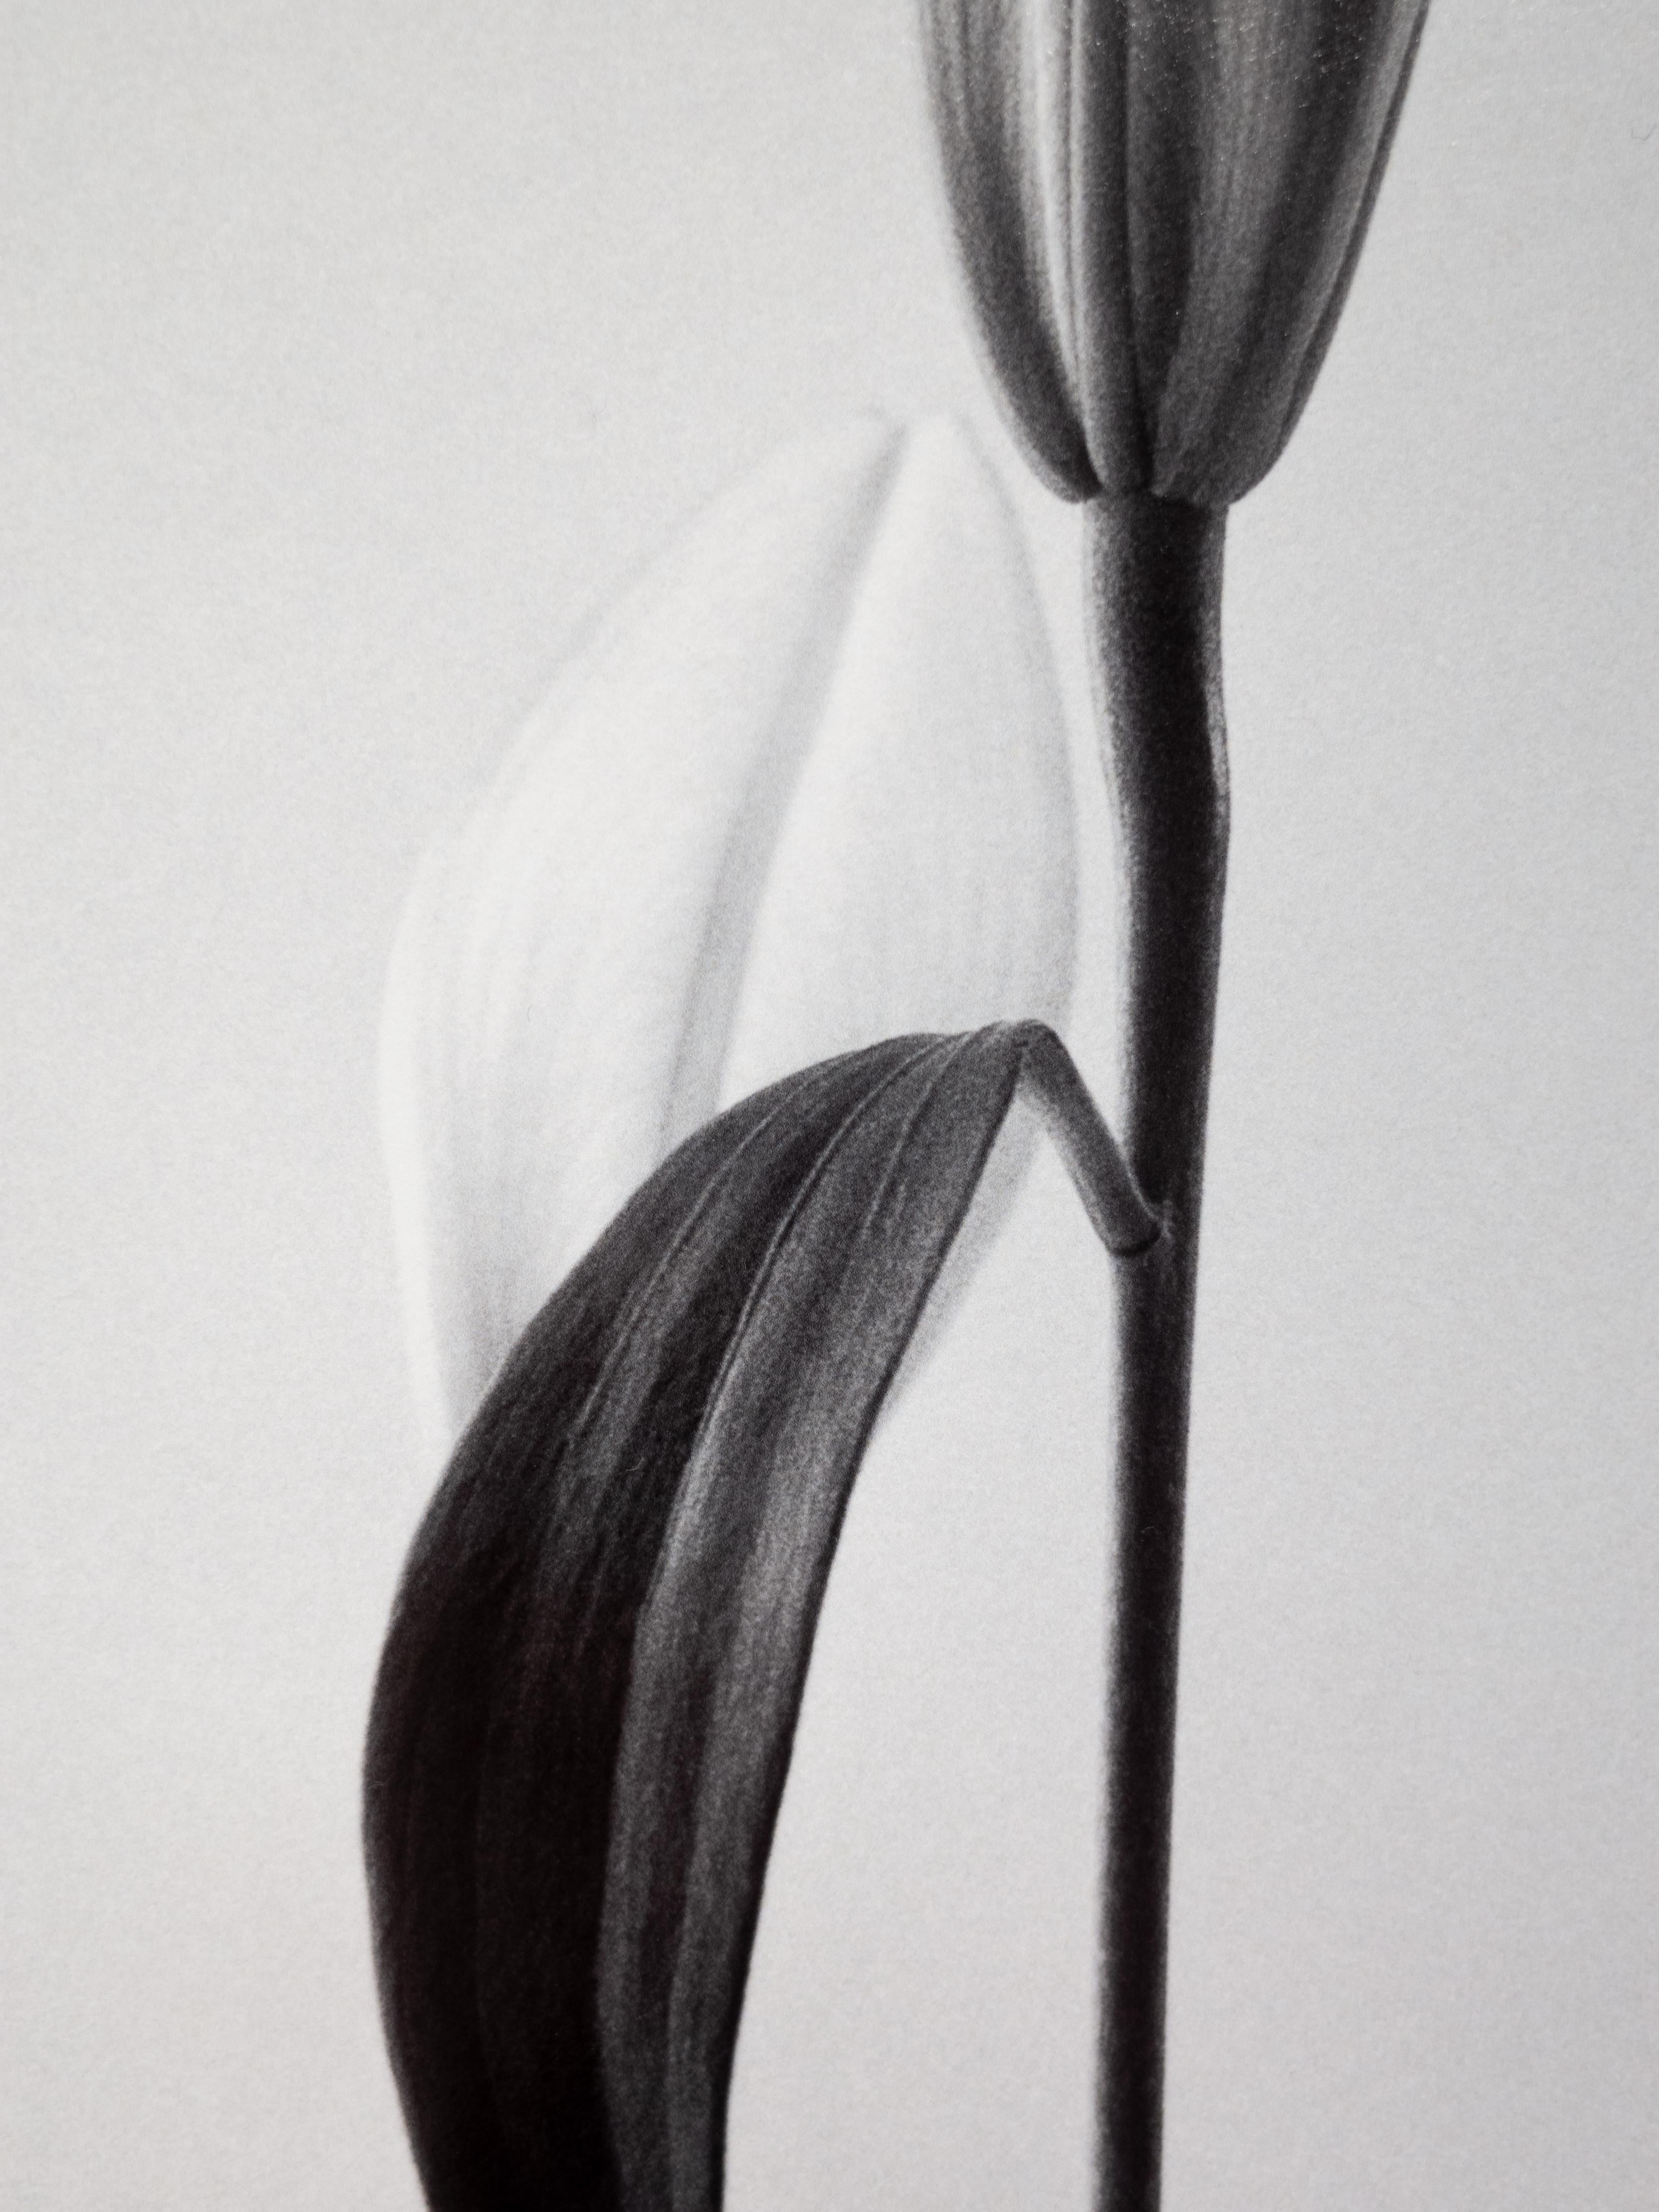 Lily - analogue black and white floral photography - Minimalist Photograph by Ugne Pouwell